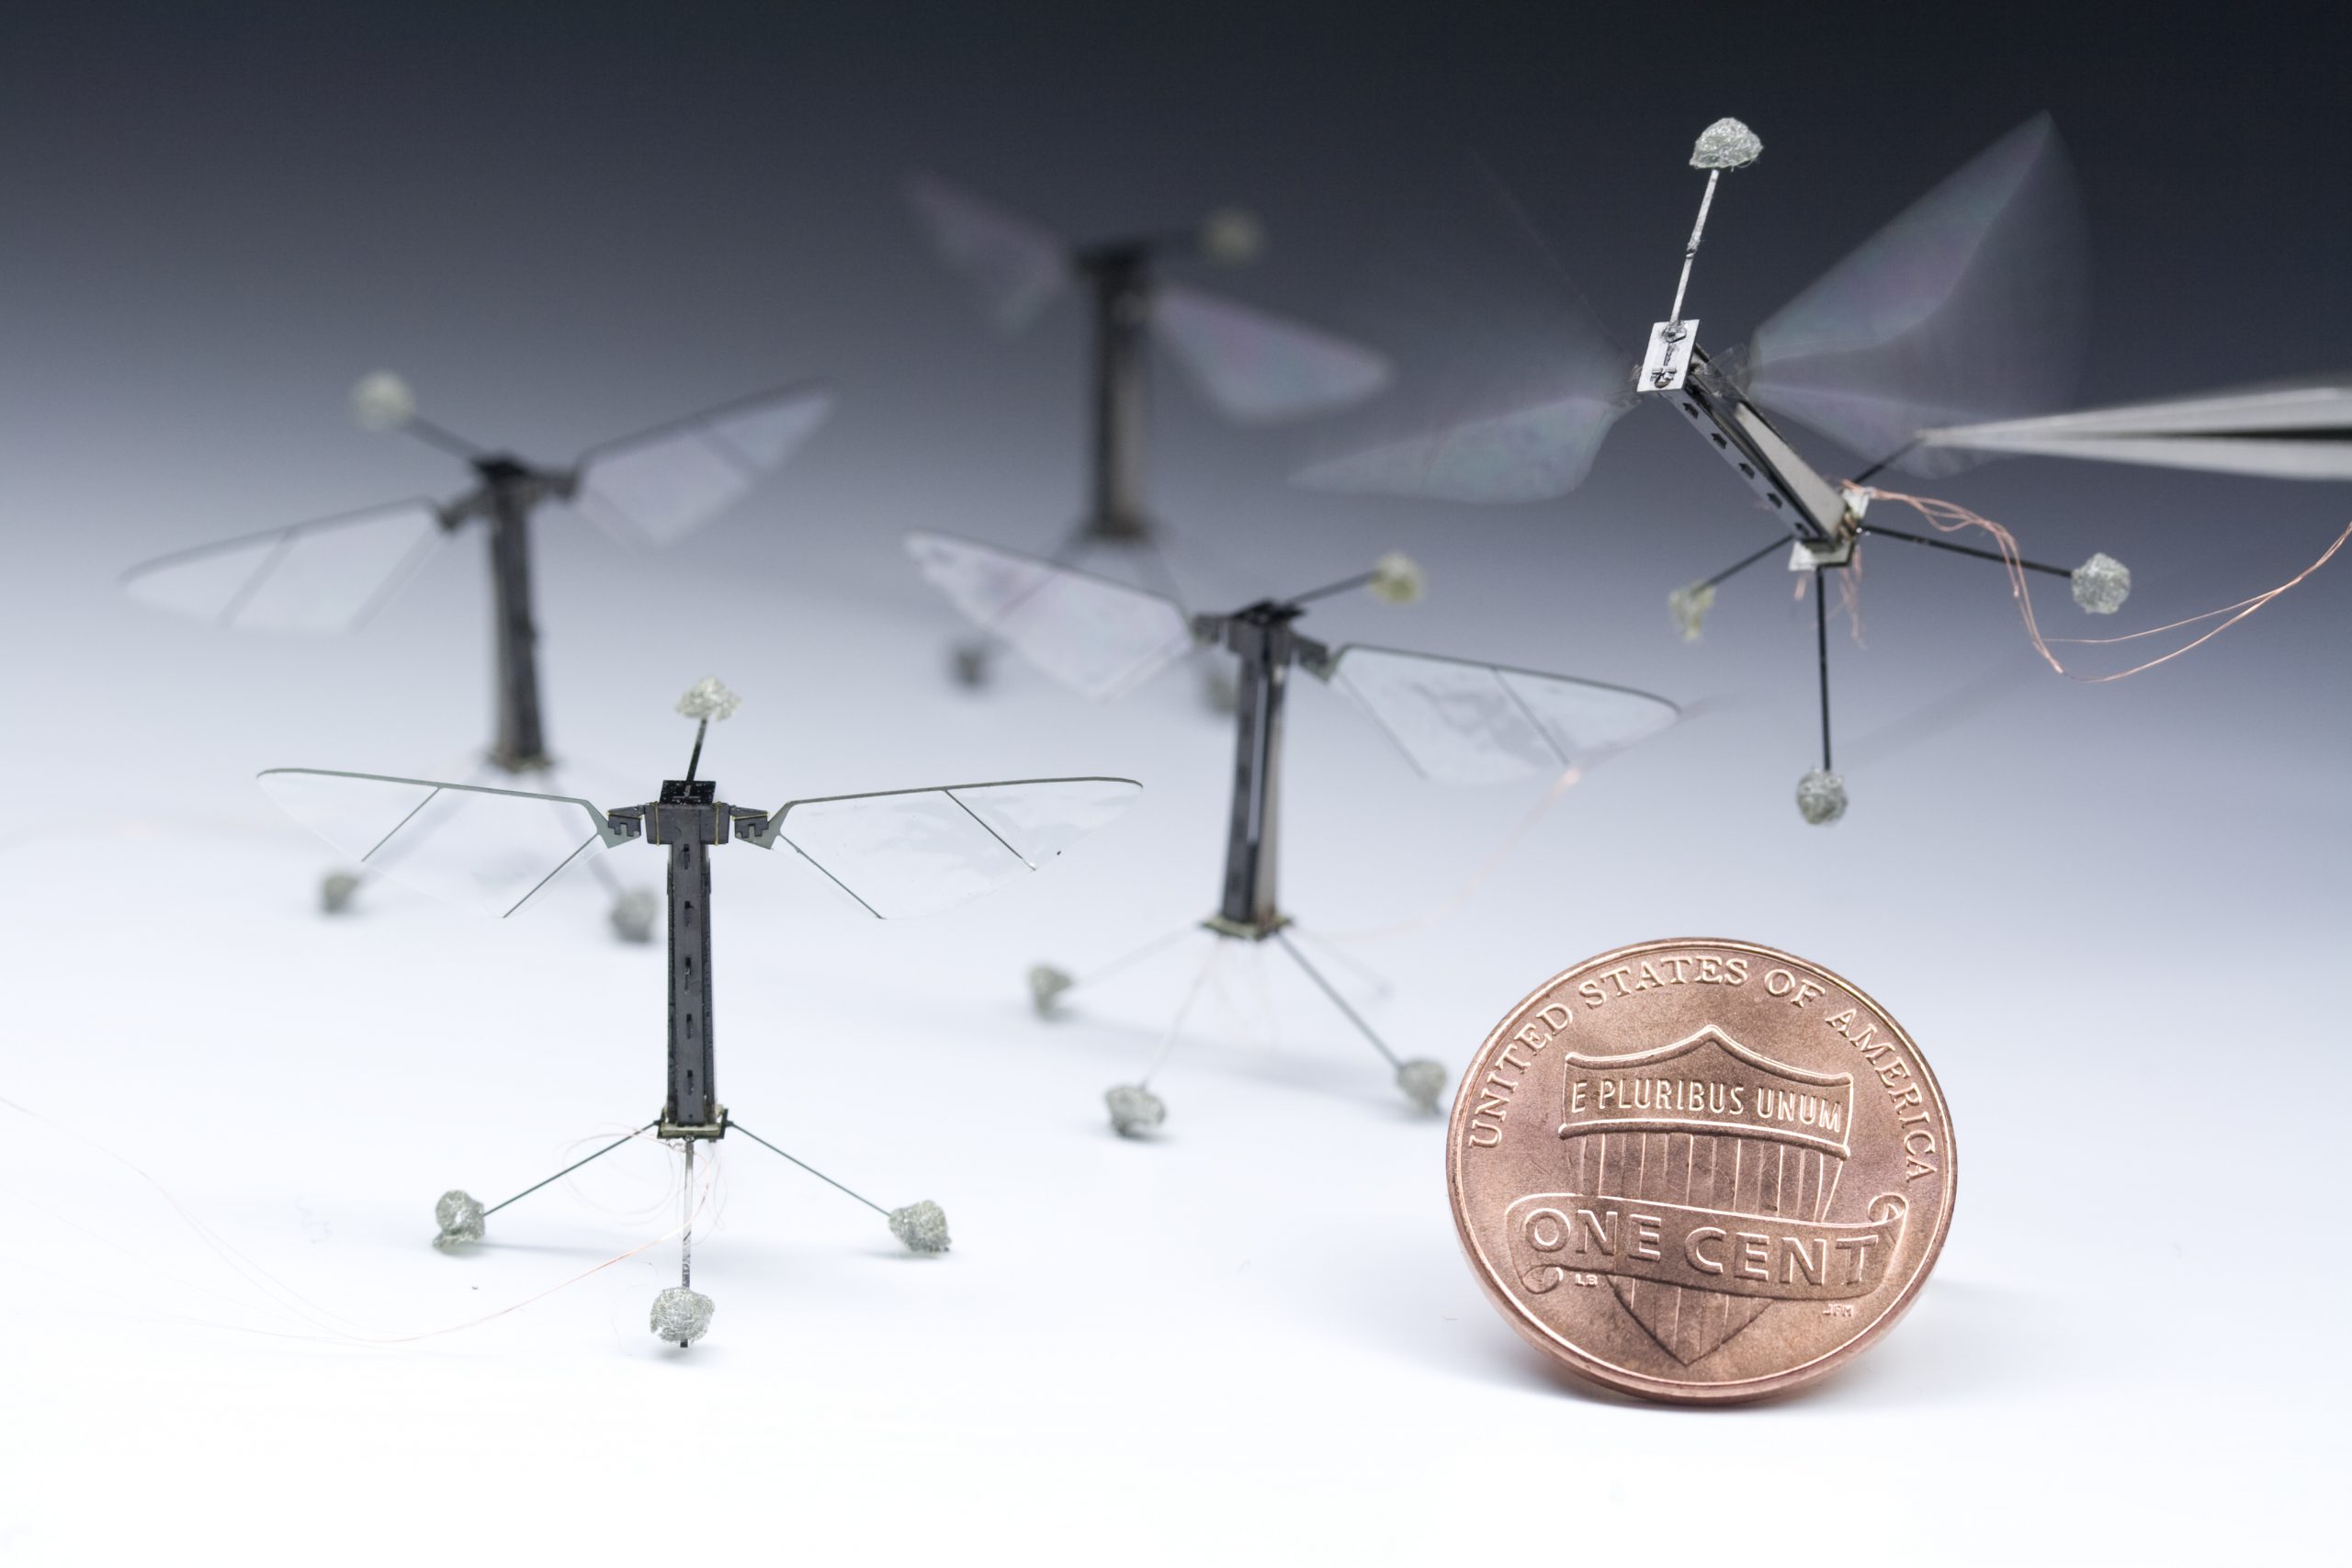 Tiny Flying Robots Are Being Built To Pollinate Crops Instead Of Real Bees